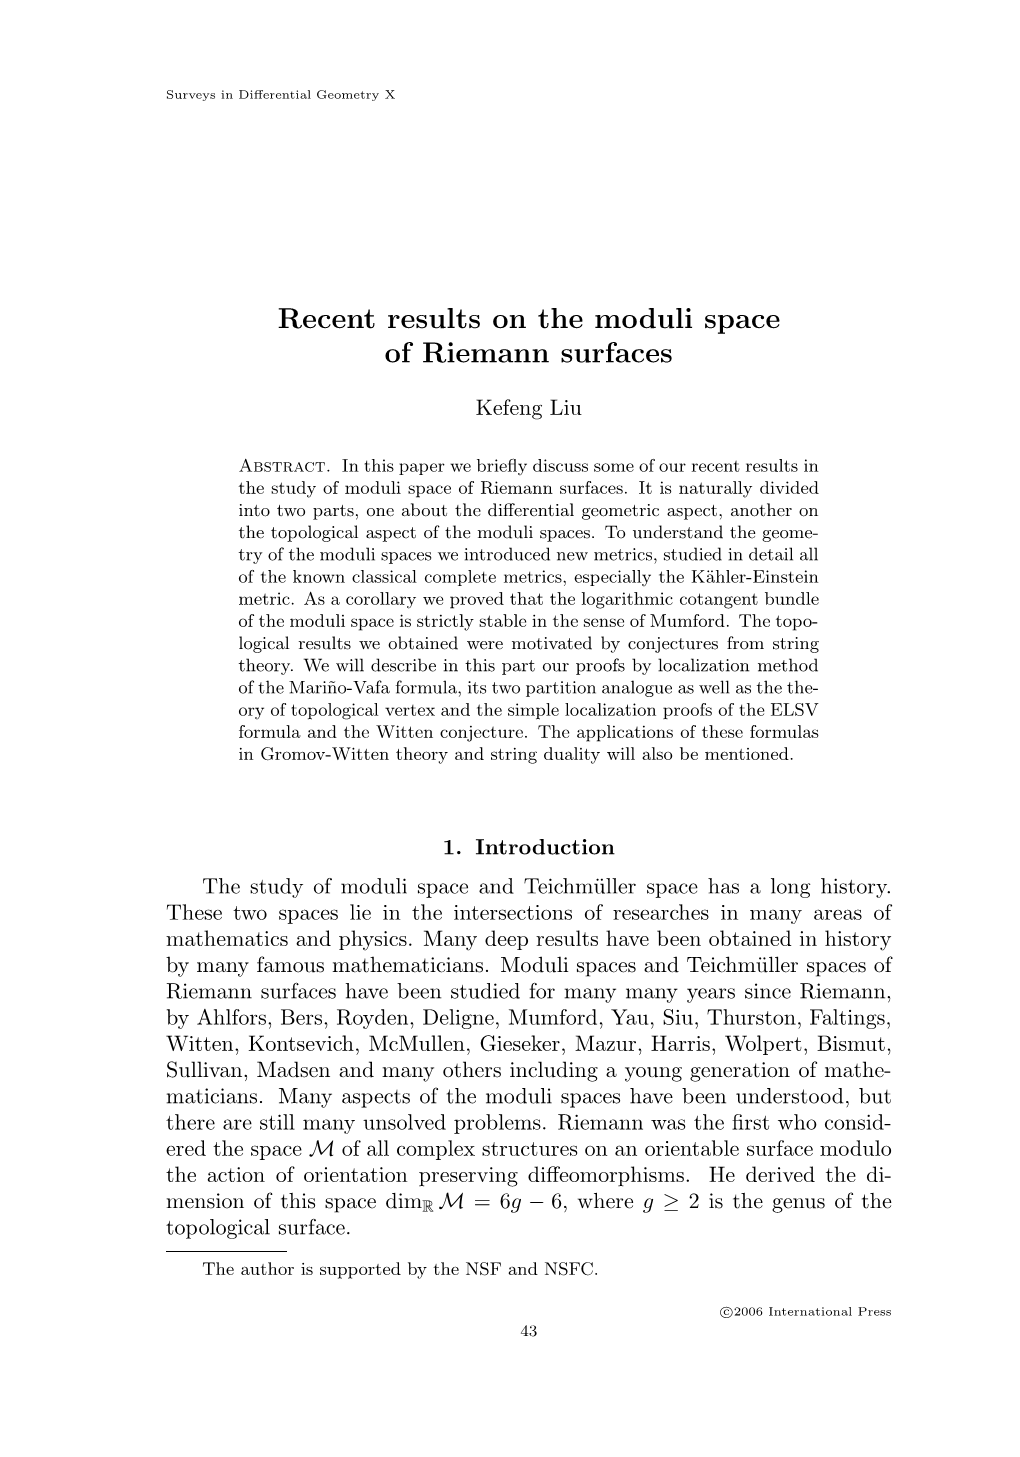 Recent Results on the Moduli Space of Riemann Surfaces